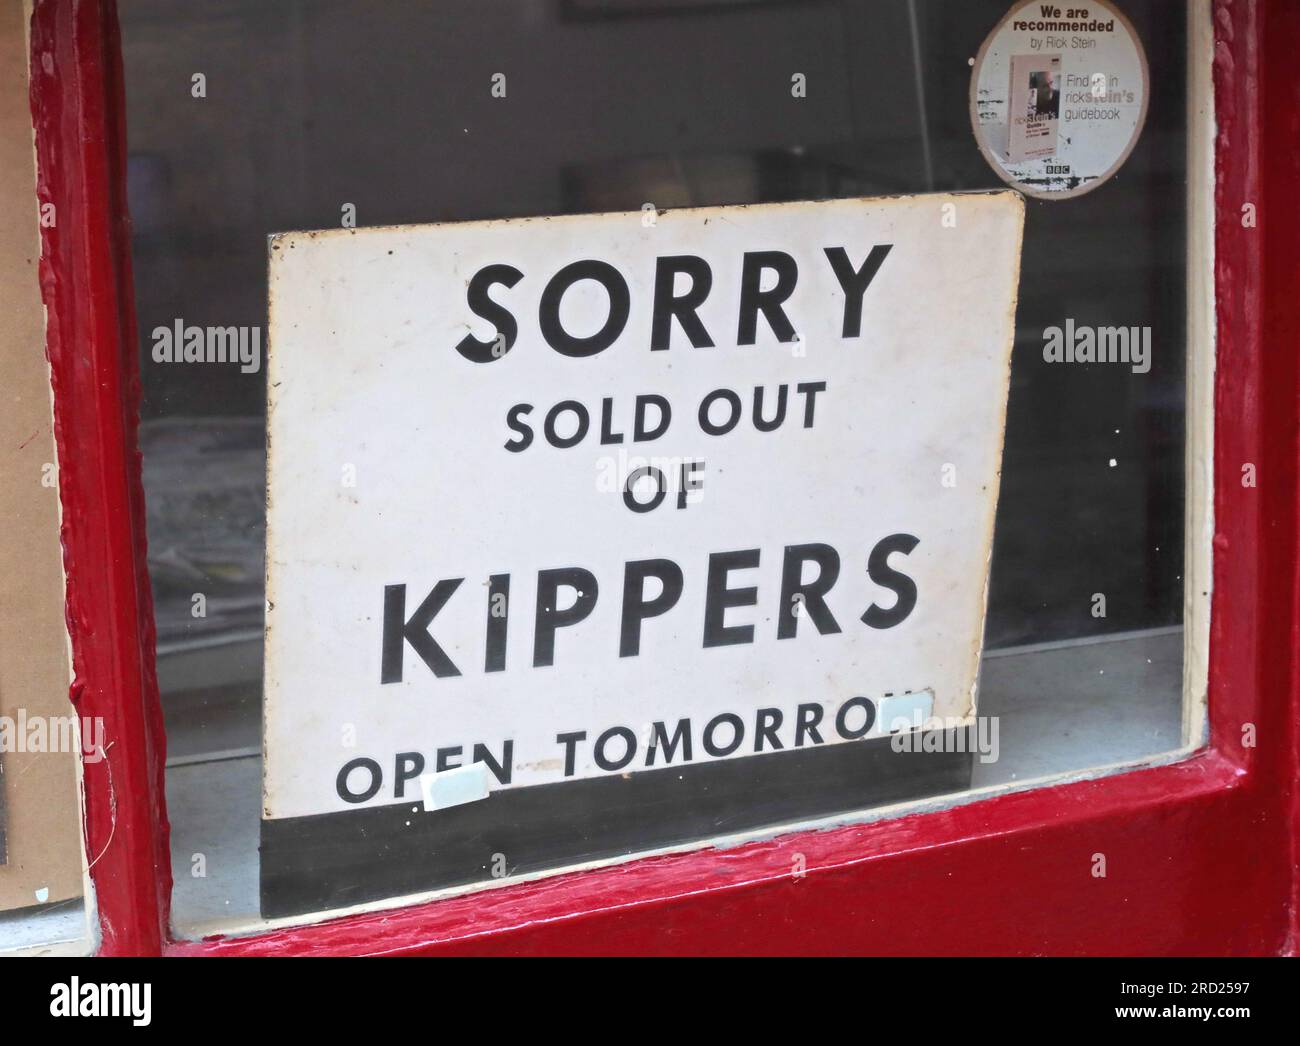 Sorry, sold out of kippers, open tomorrow, at Fortune's Kippers, smokehouse, 22 Henrietta St, Whitby, North Yorkshire, England, UK, YO22 4DW Stock Photo